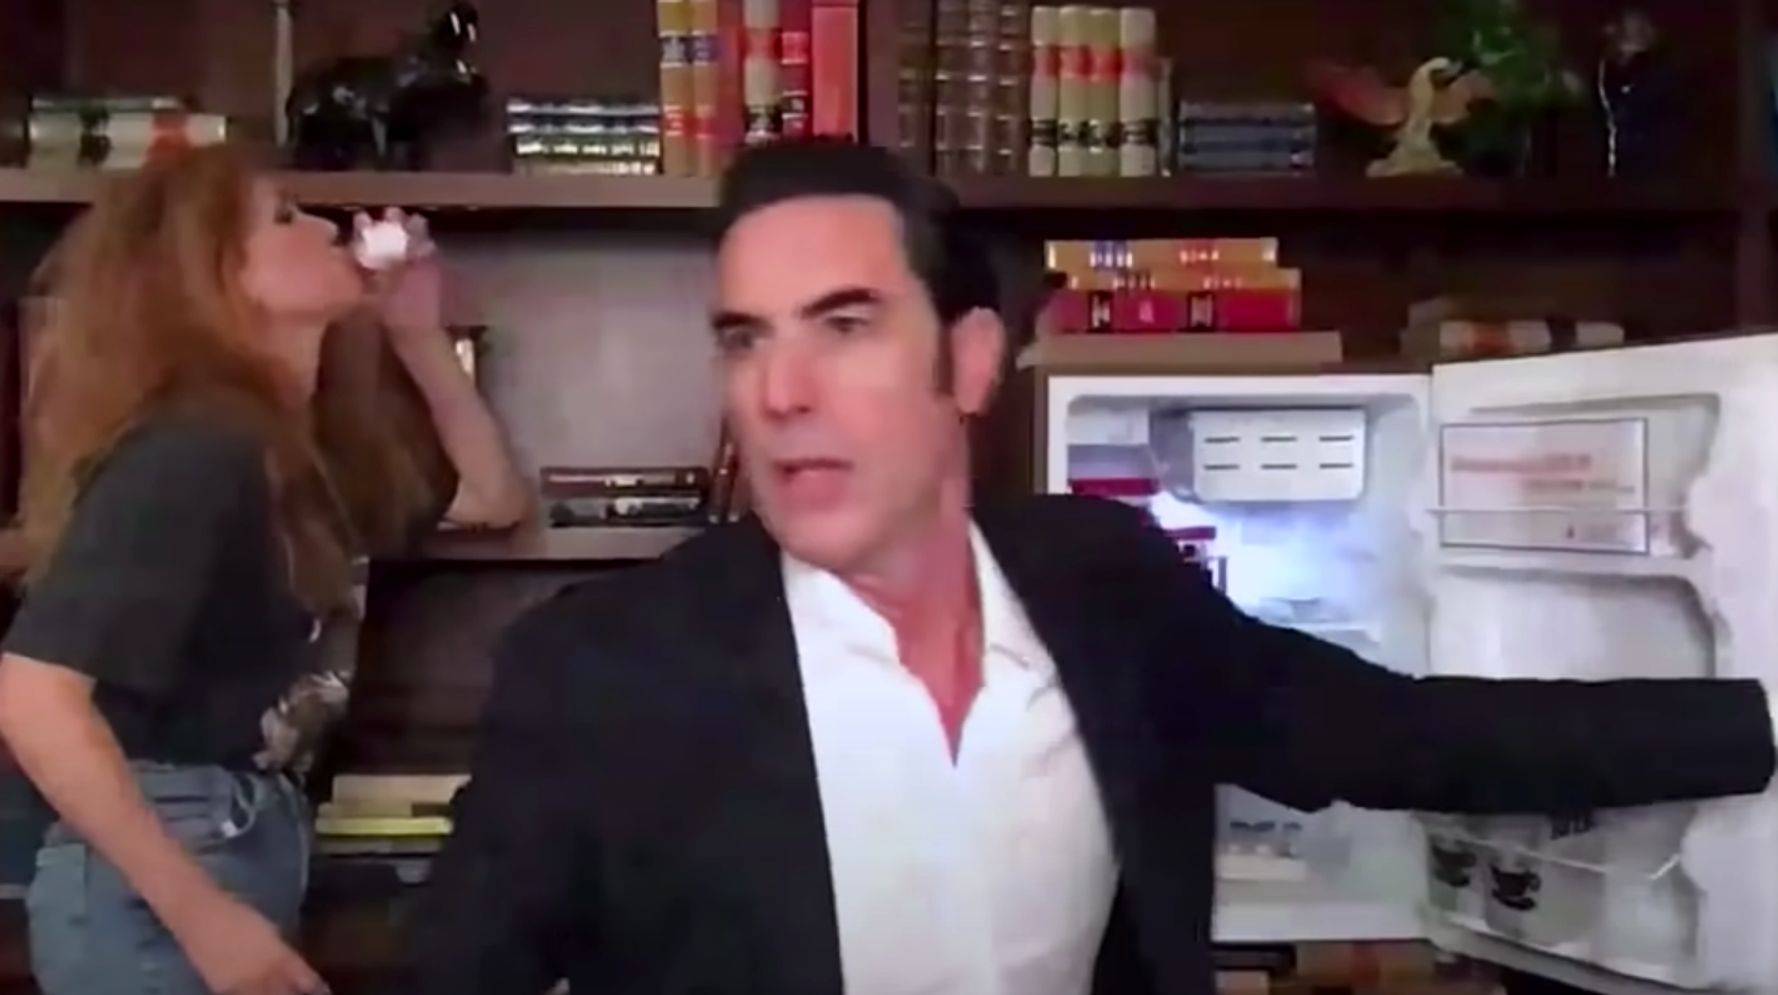 Sacha Baron Cohen Thing Donald Trump Jr., Kanye West in Wild Video COVID-19 Selling Vaccination